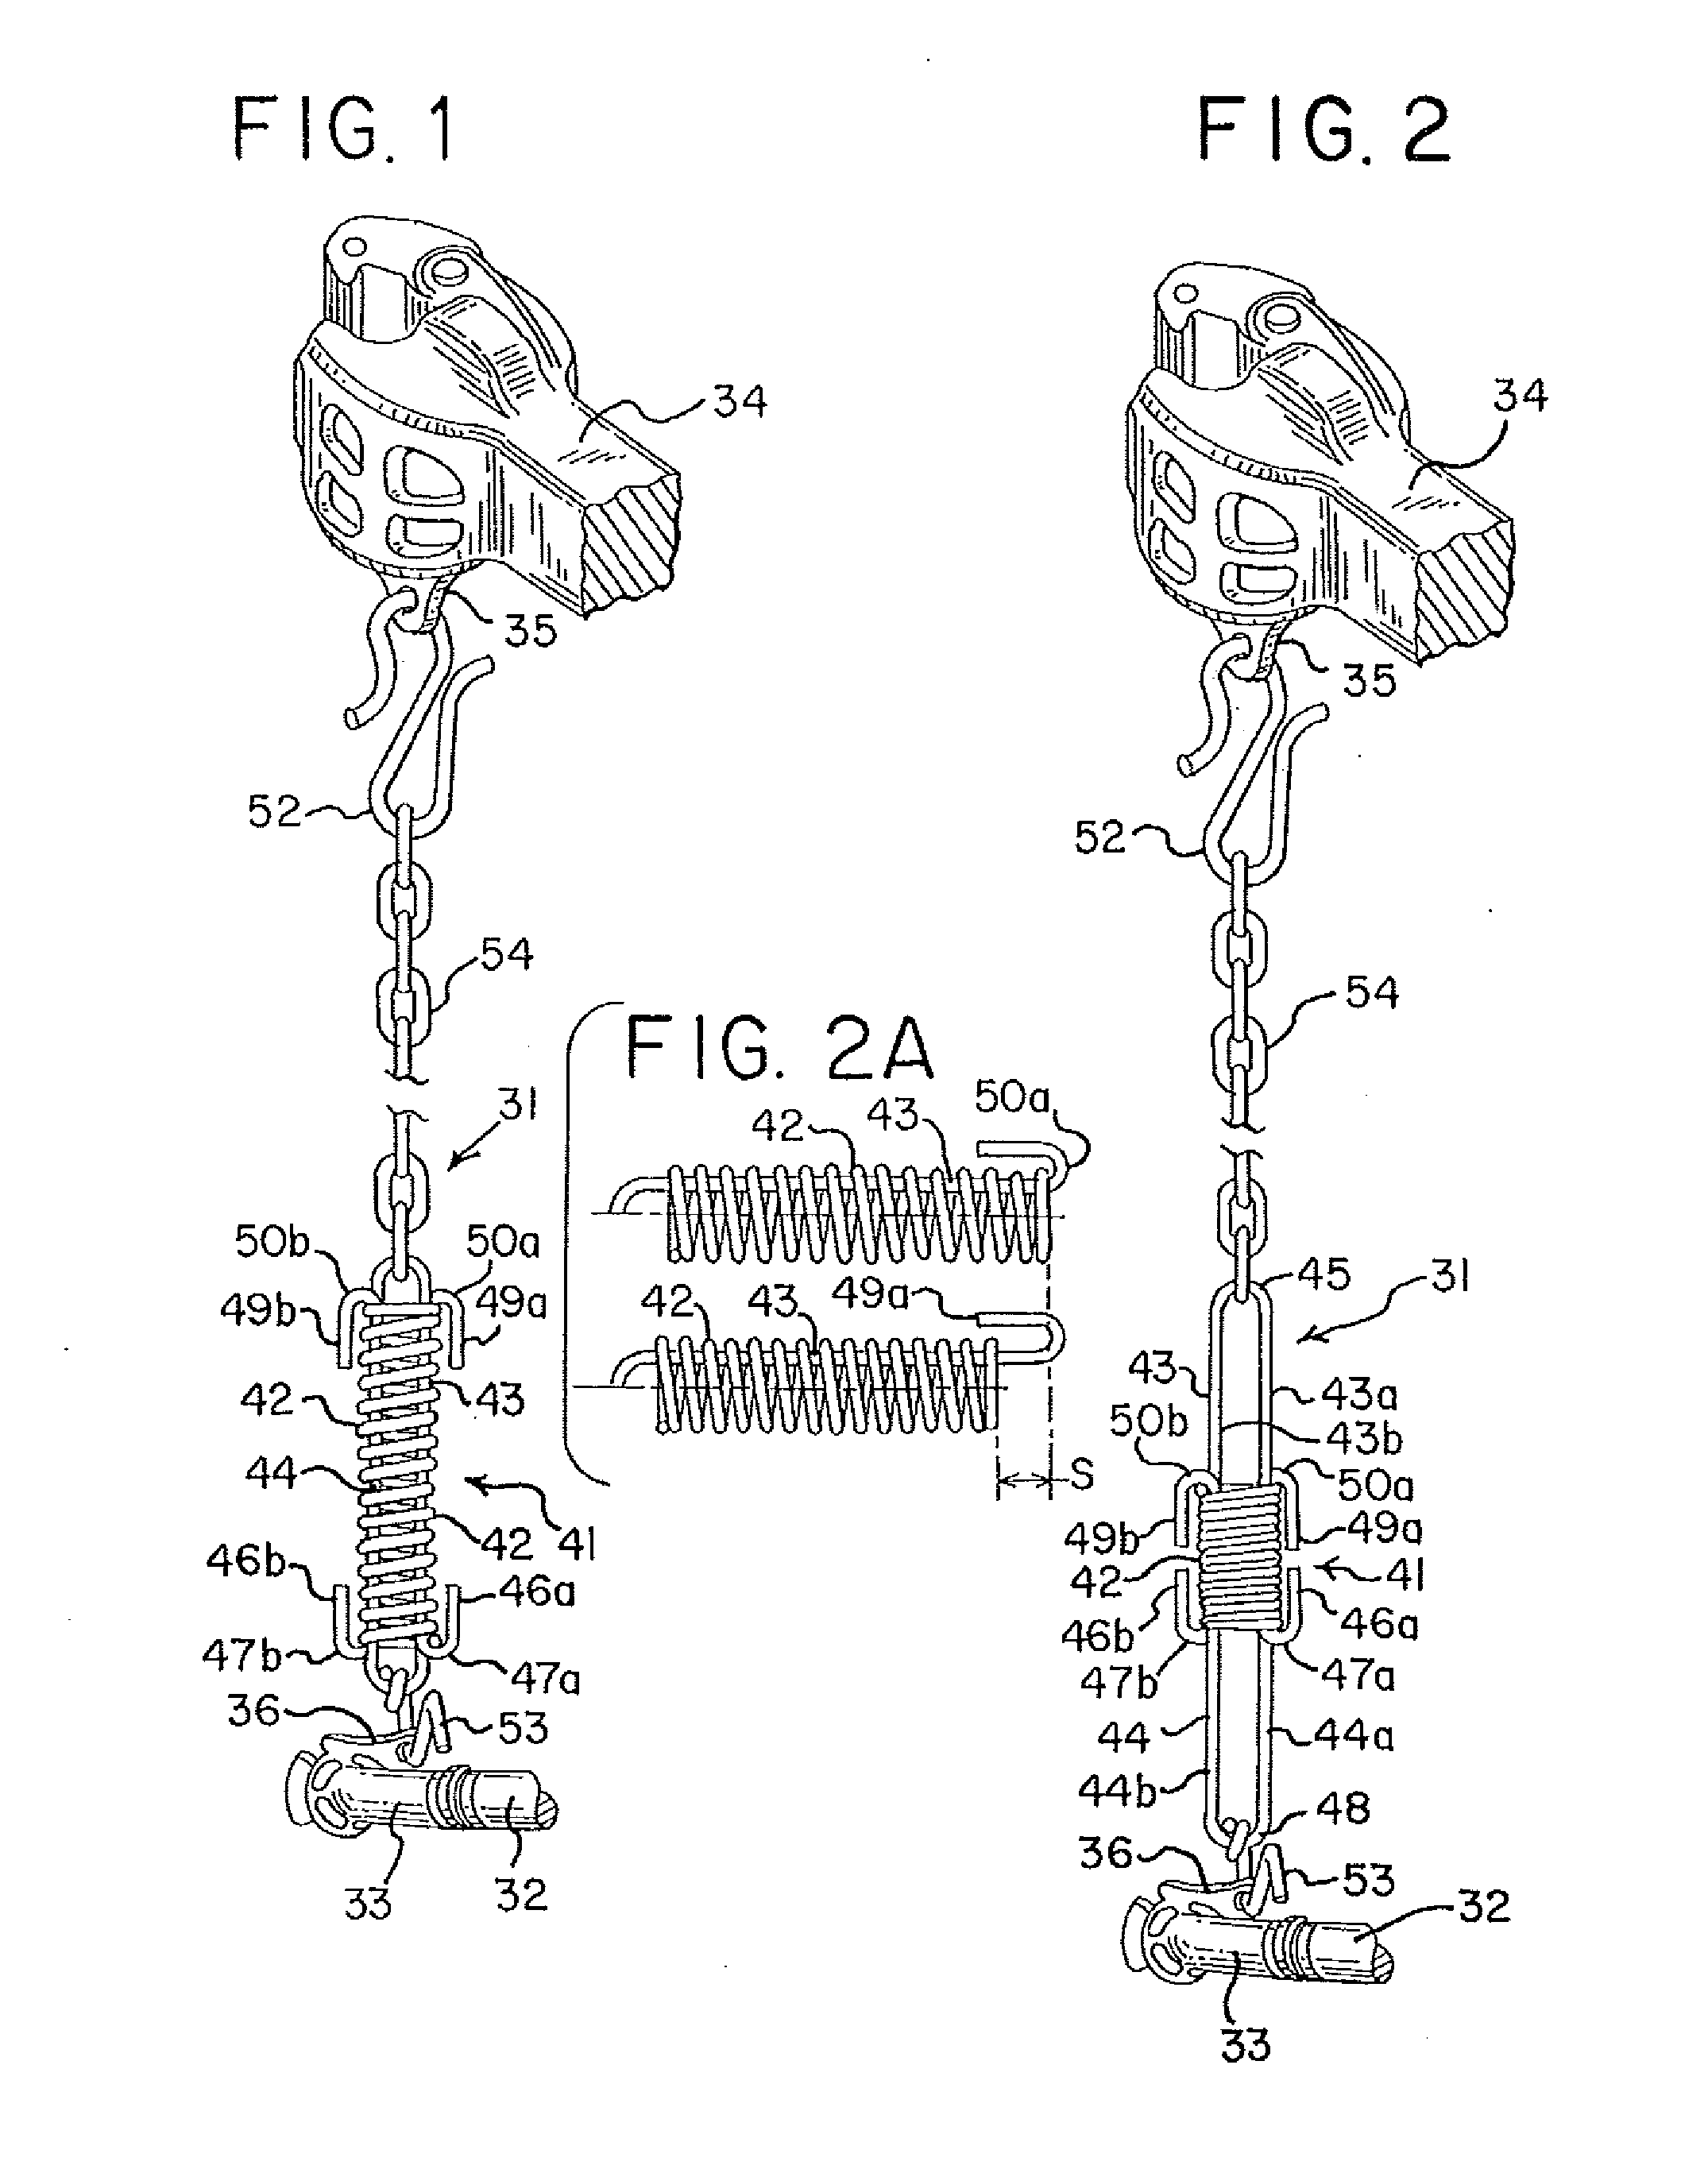 Spring-style air brake hose support